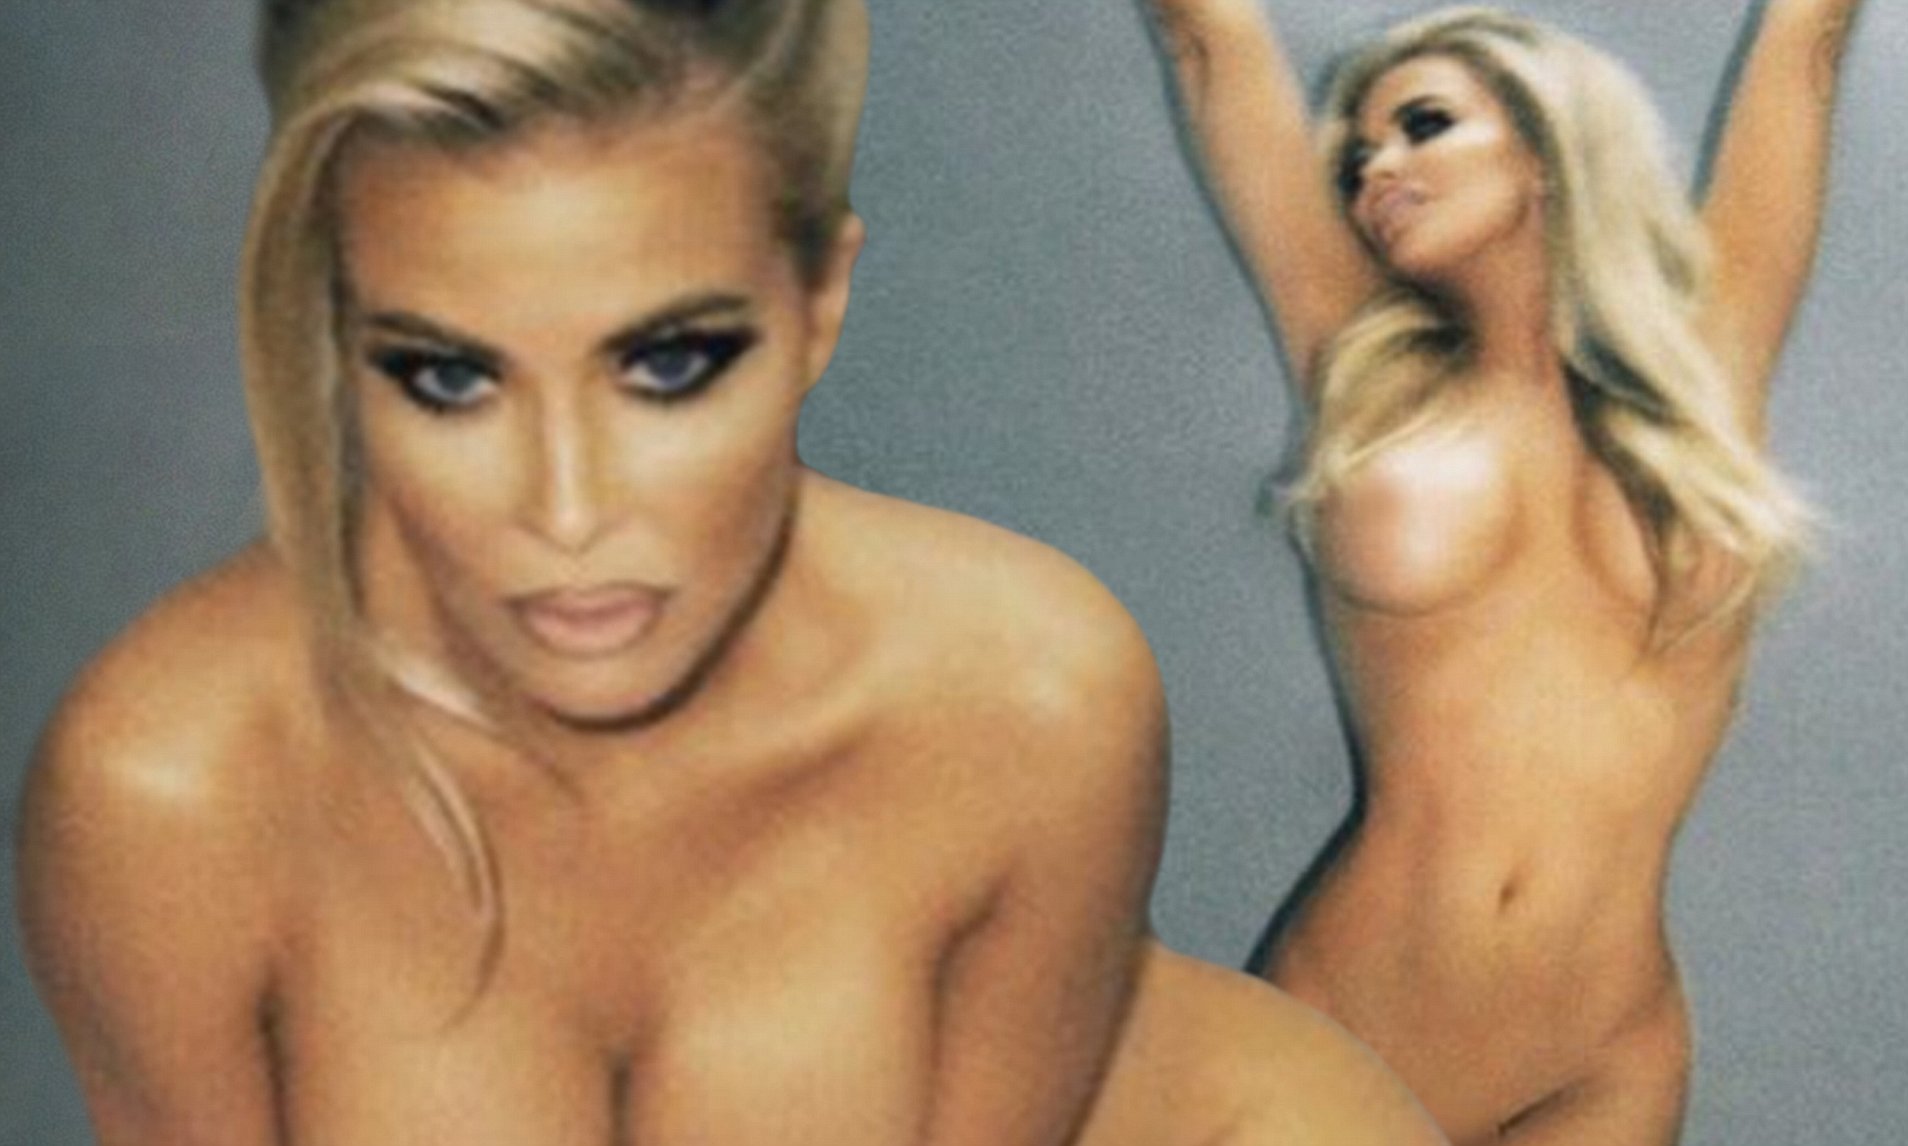 andrei luchian recommends carmen electra naked playboy pic